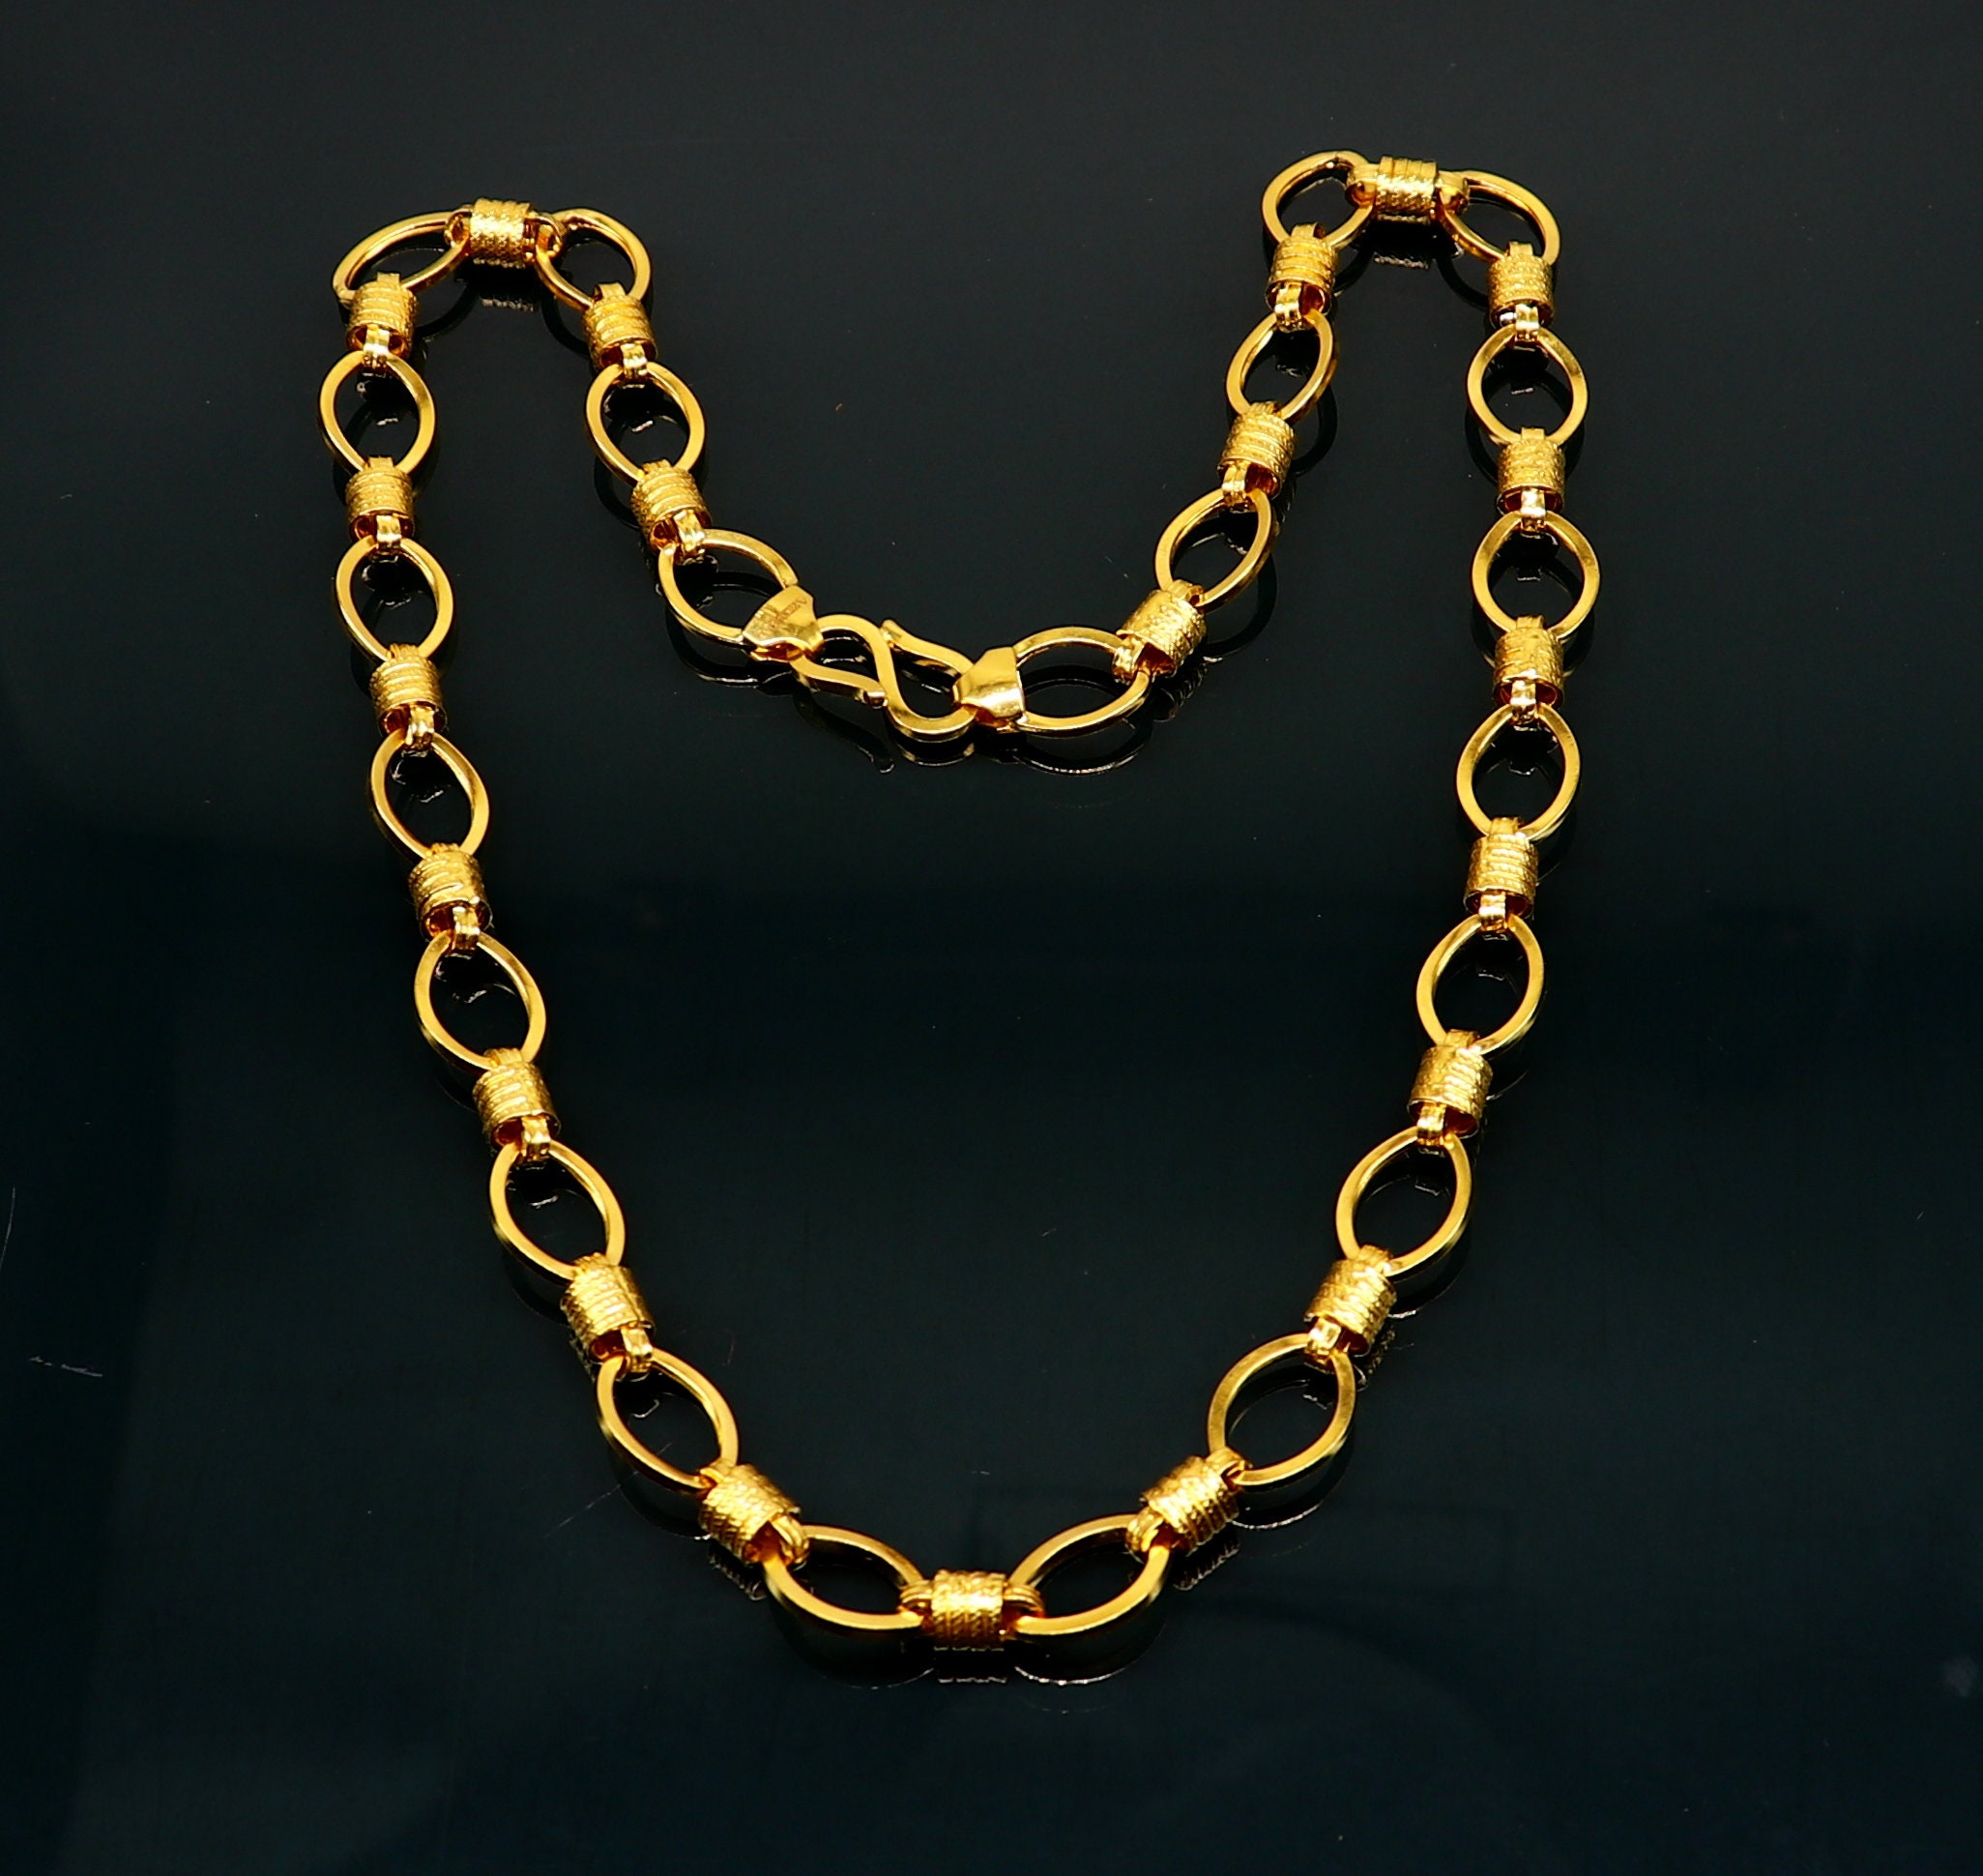 Gorgeous 22kt Yellow Gold Solid Excellent Design Chain -   Mens gold  chain necklace, Mens gold jewelry, Gold chains for men